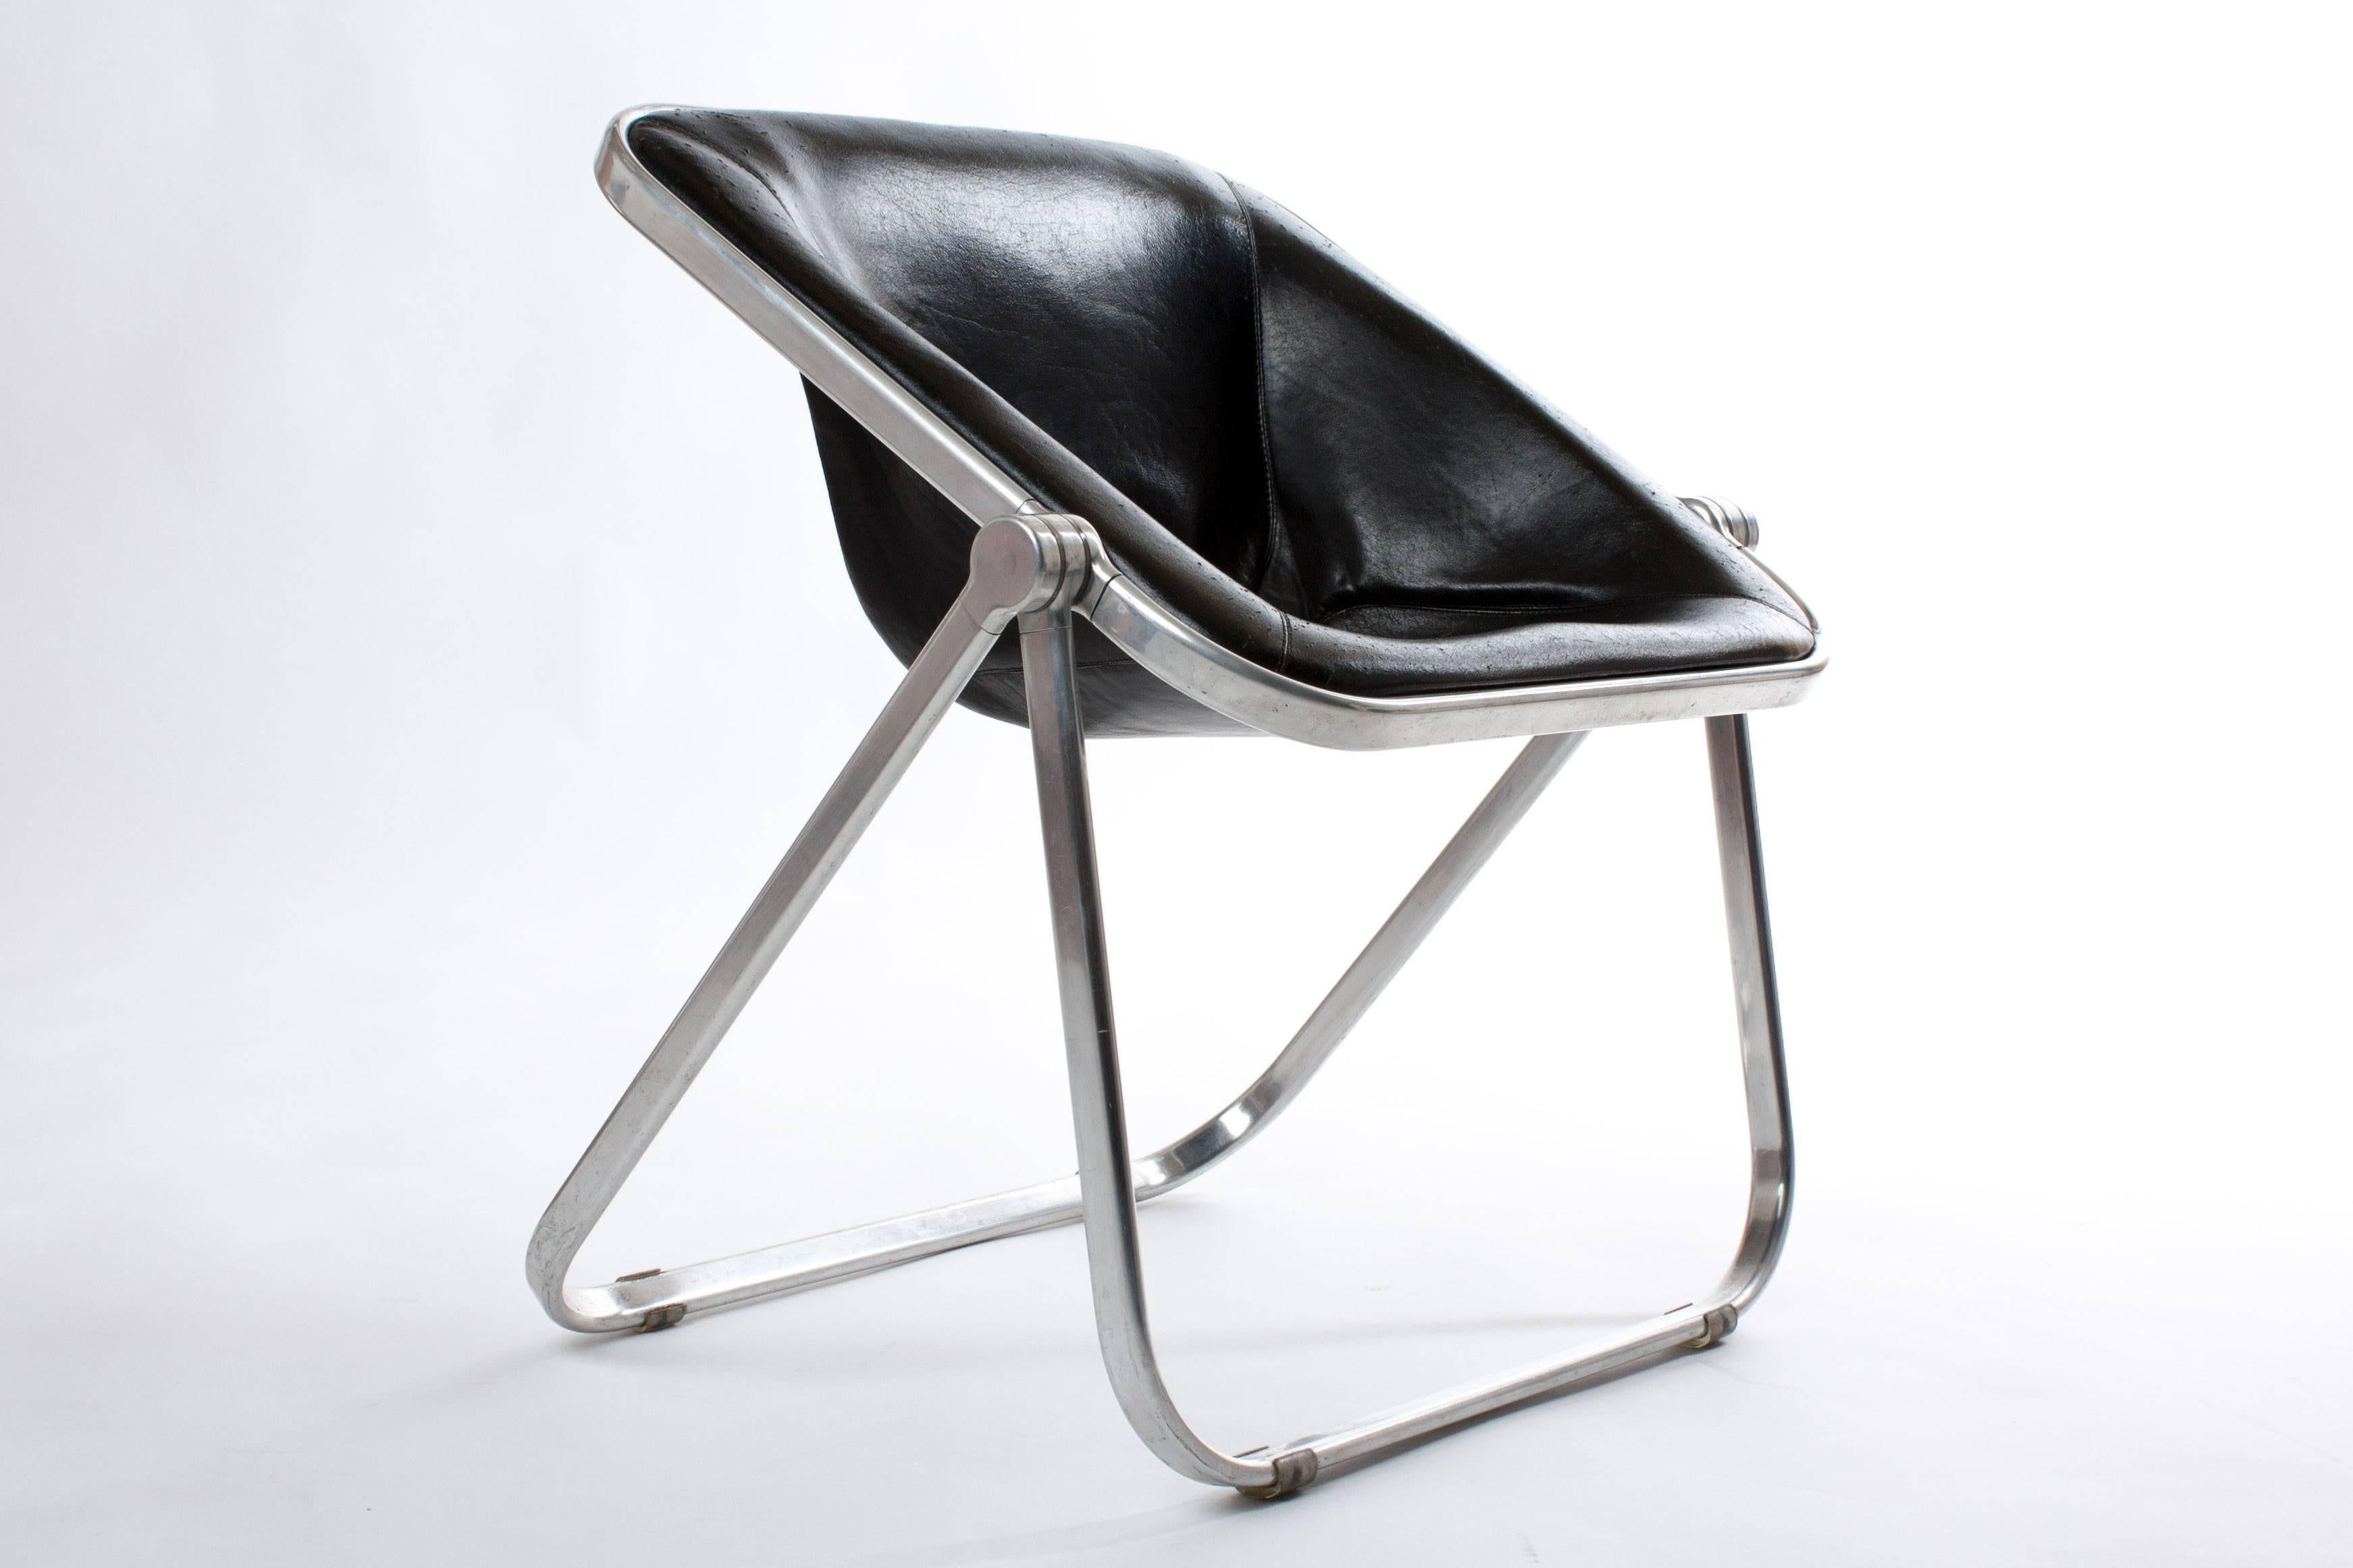 The PLONA FOLDING CHAIR is an efficient modern reworking of the traditional wooden folding chair. When collapsed, it is very thin in depth, excluding the central sitting part. This is the luxe leather edition of the Plia.